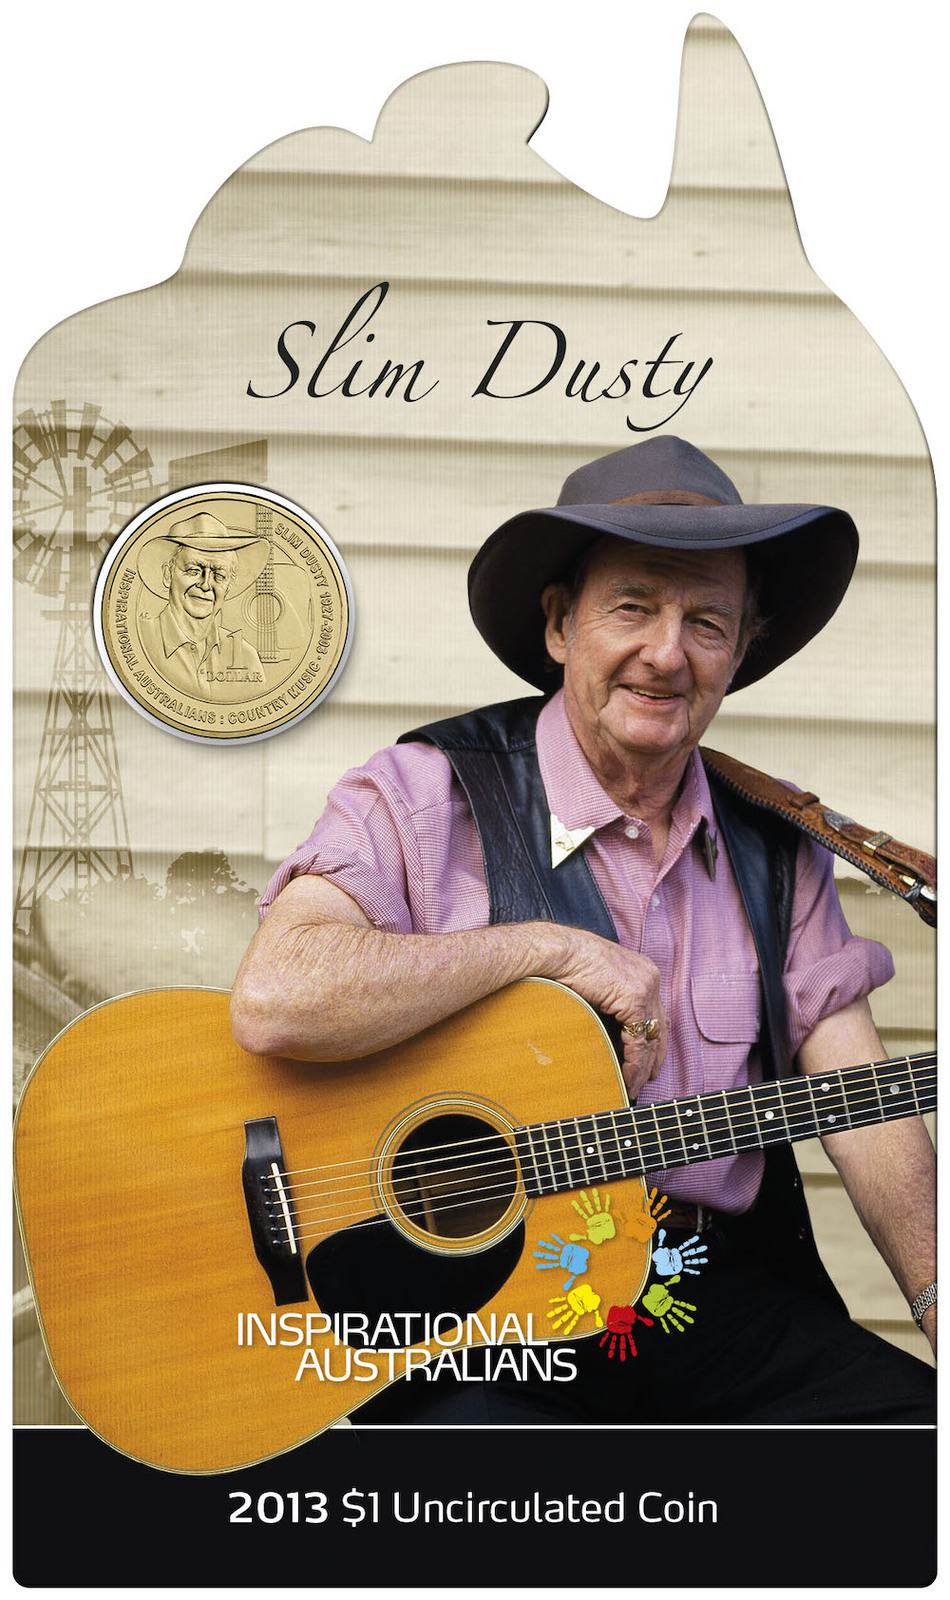 2013 $1 Uncirculated Coin Inspirational Australians - Slim Dusty  product image